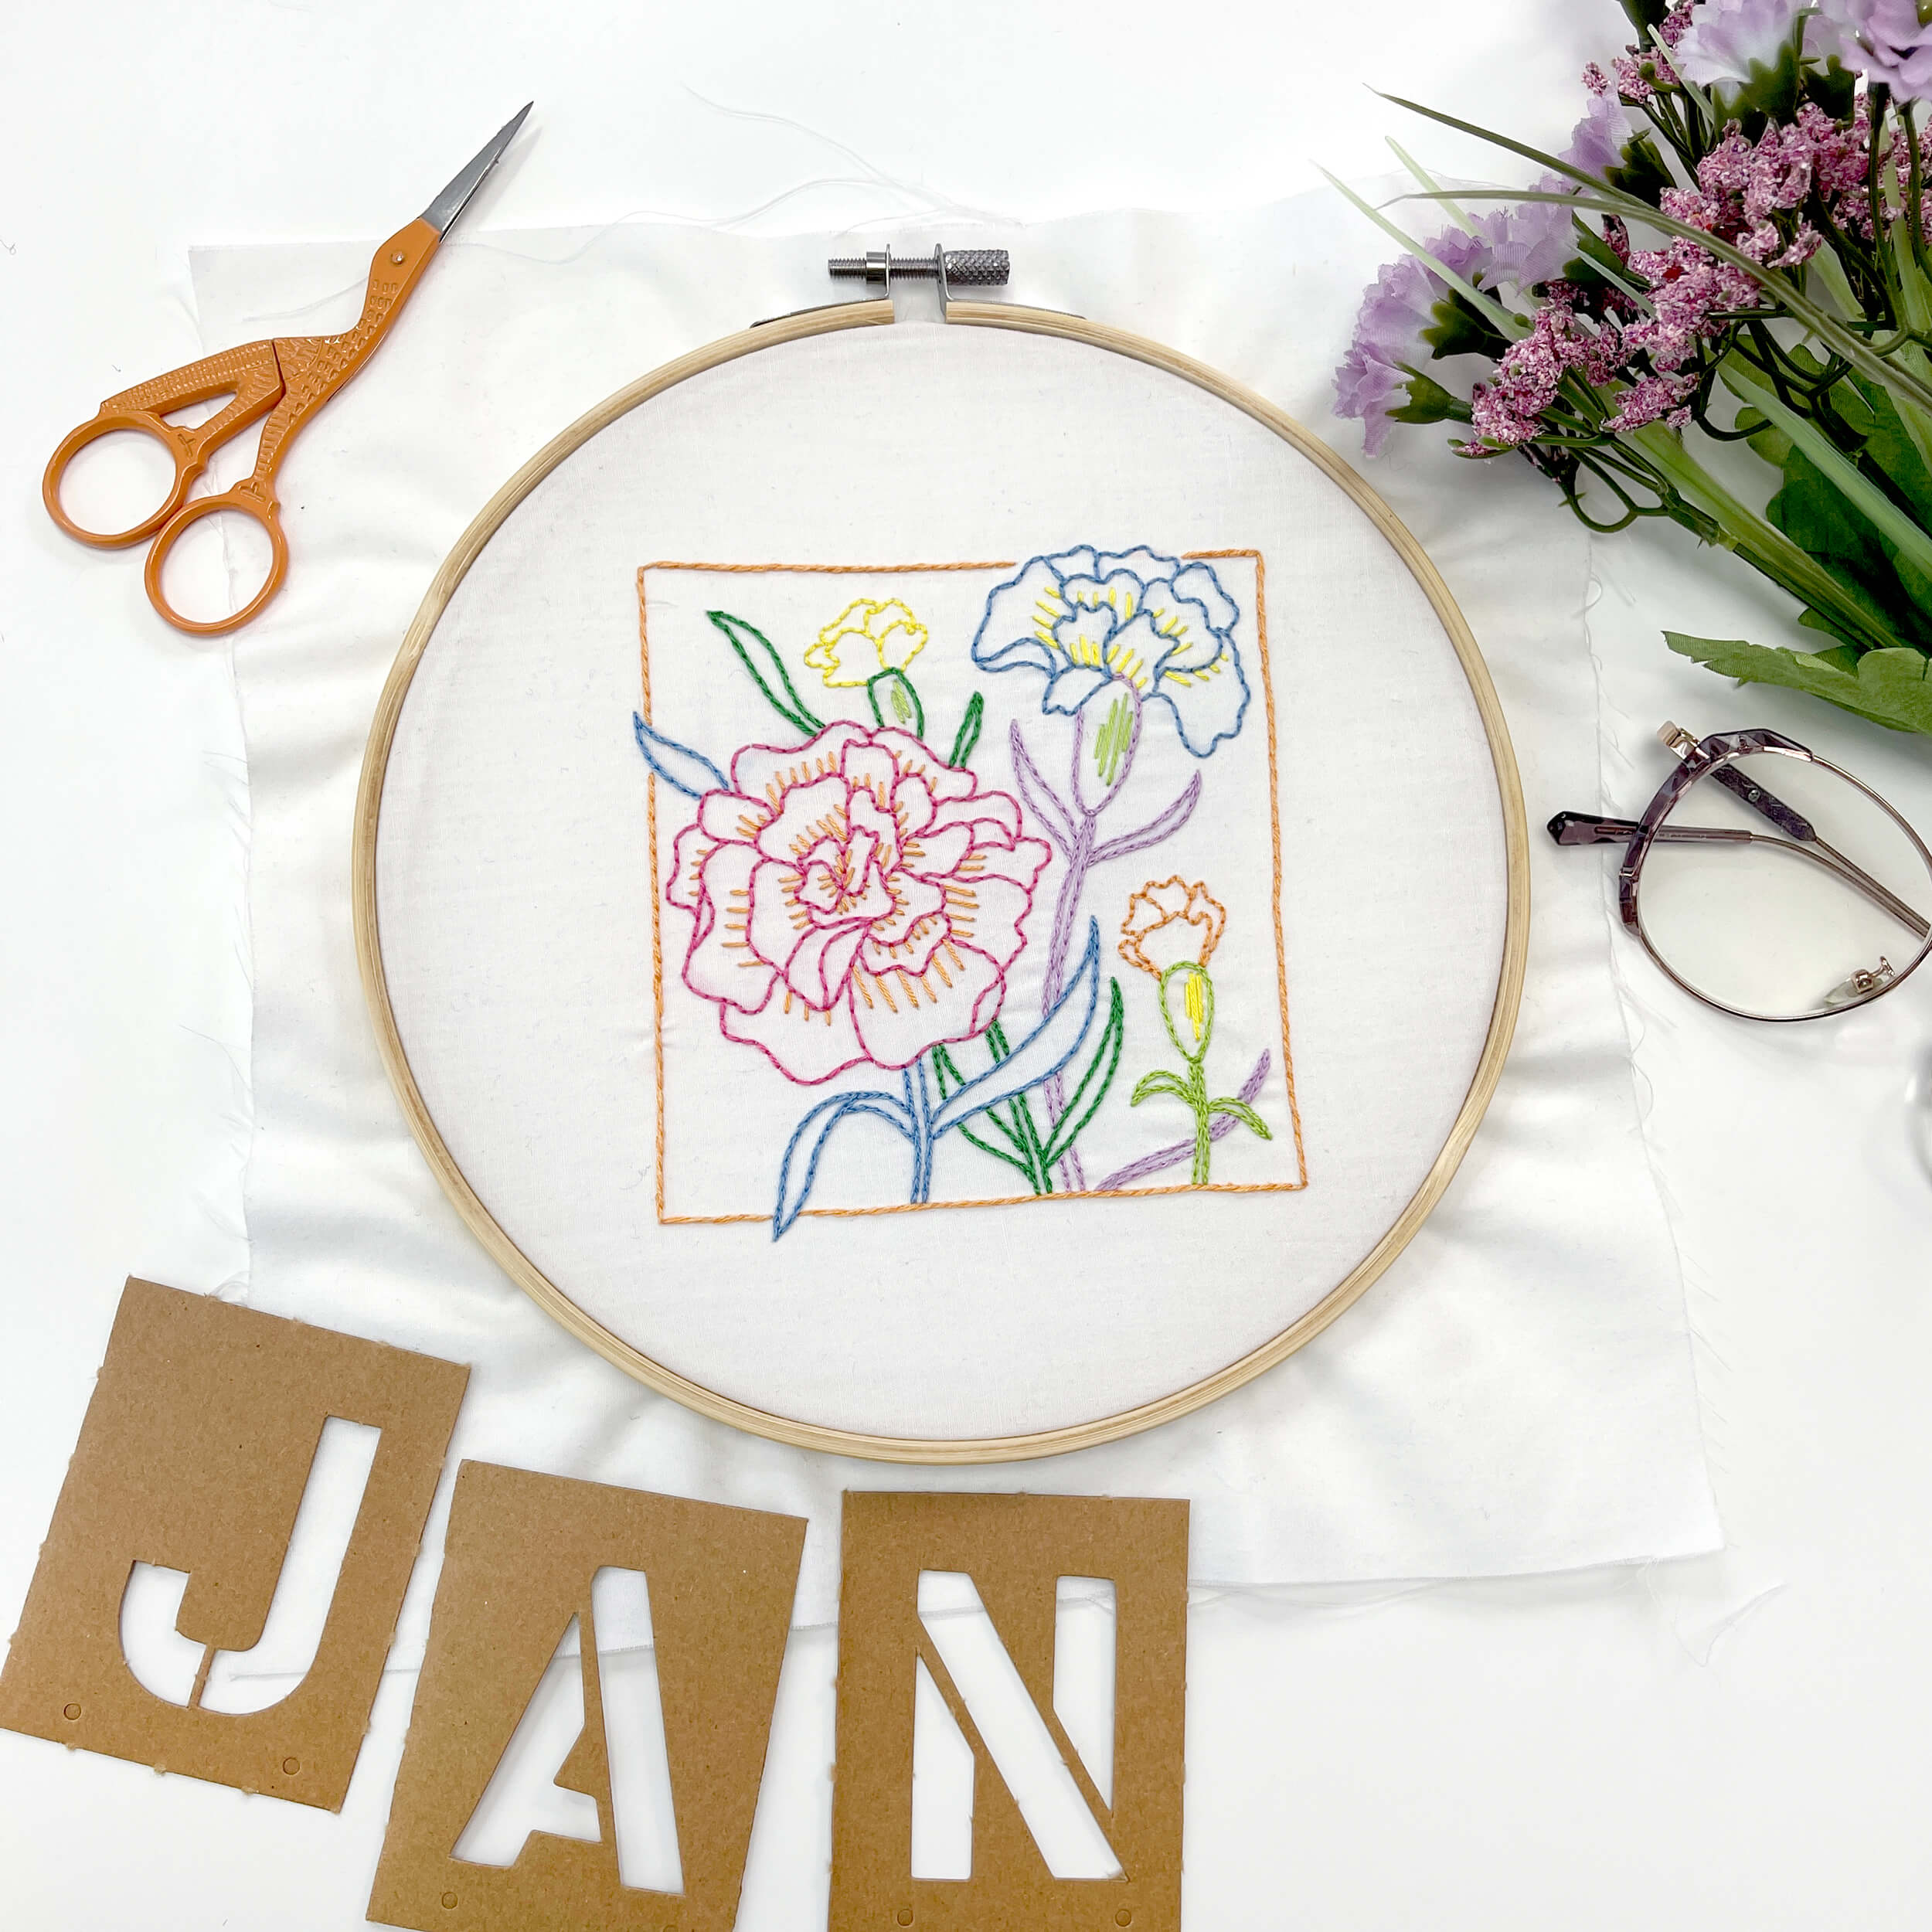 January Carnation - January birth month flower embroidery finished